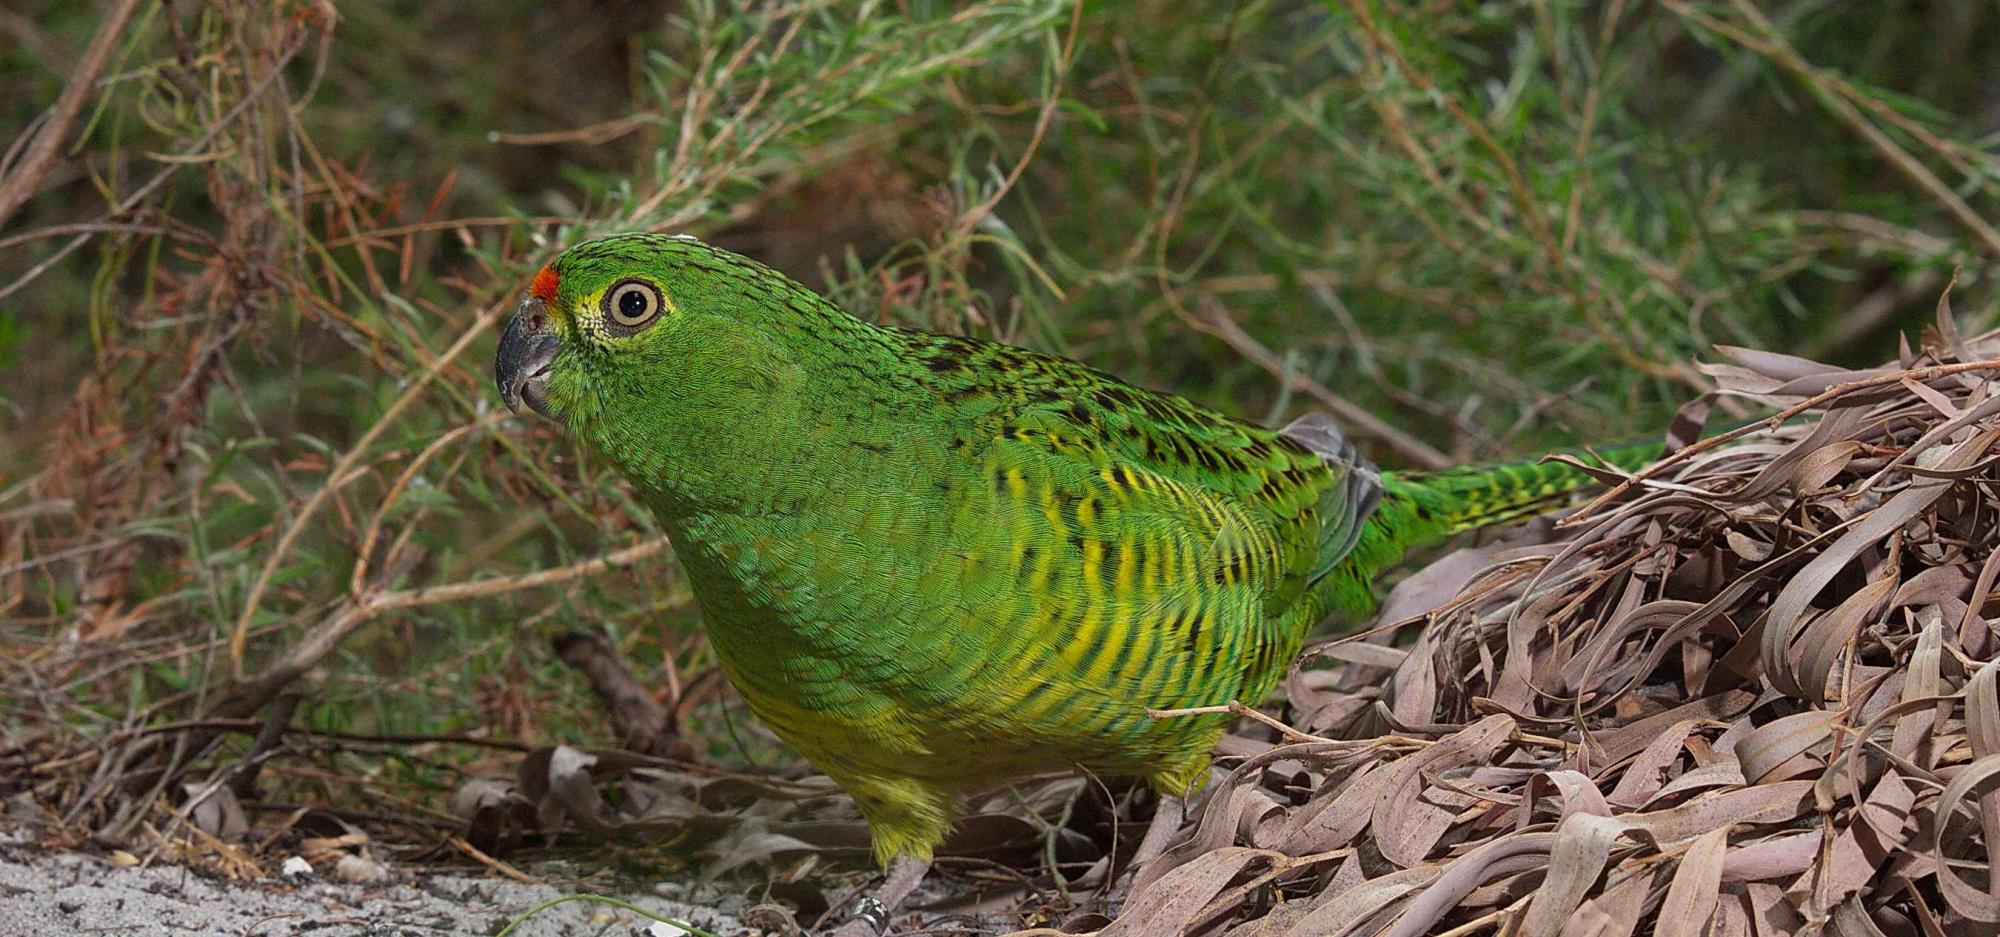 A western ground parrot sitting on some fallen leaves in daytime